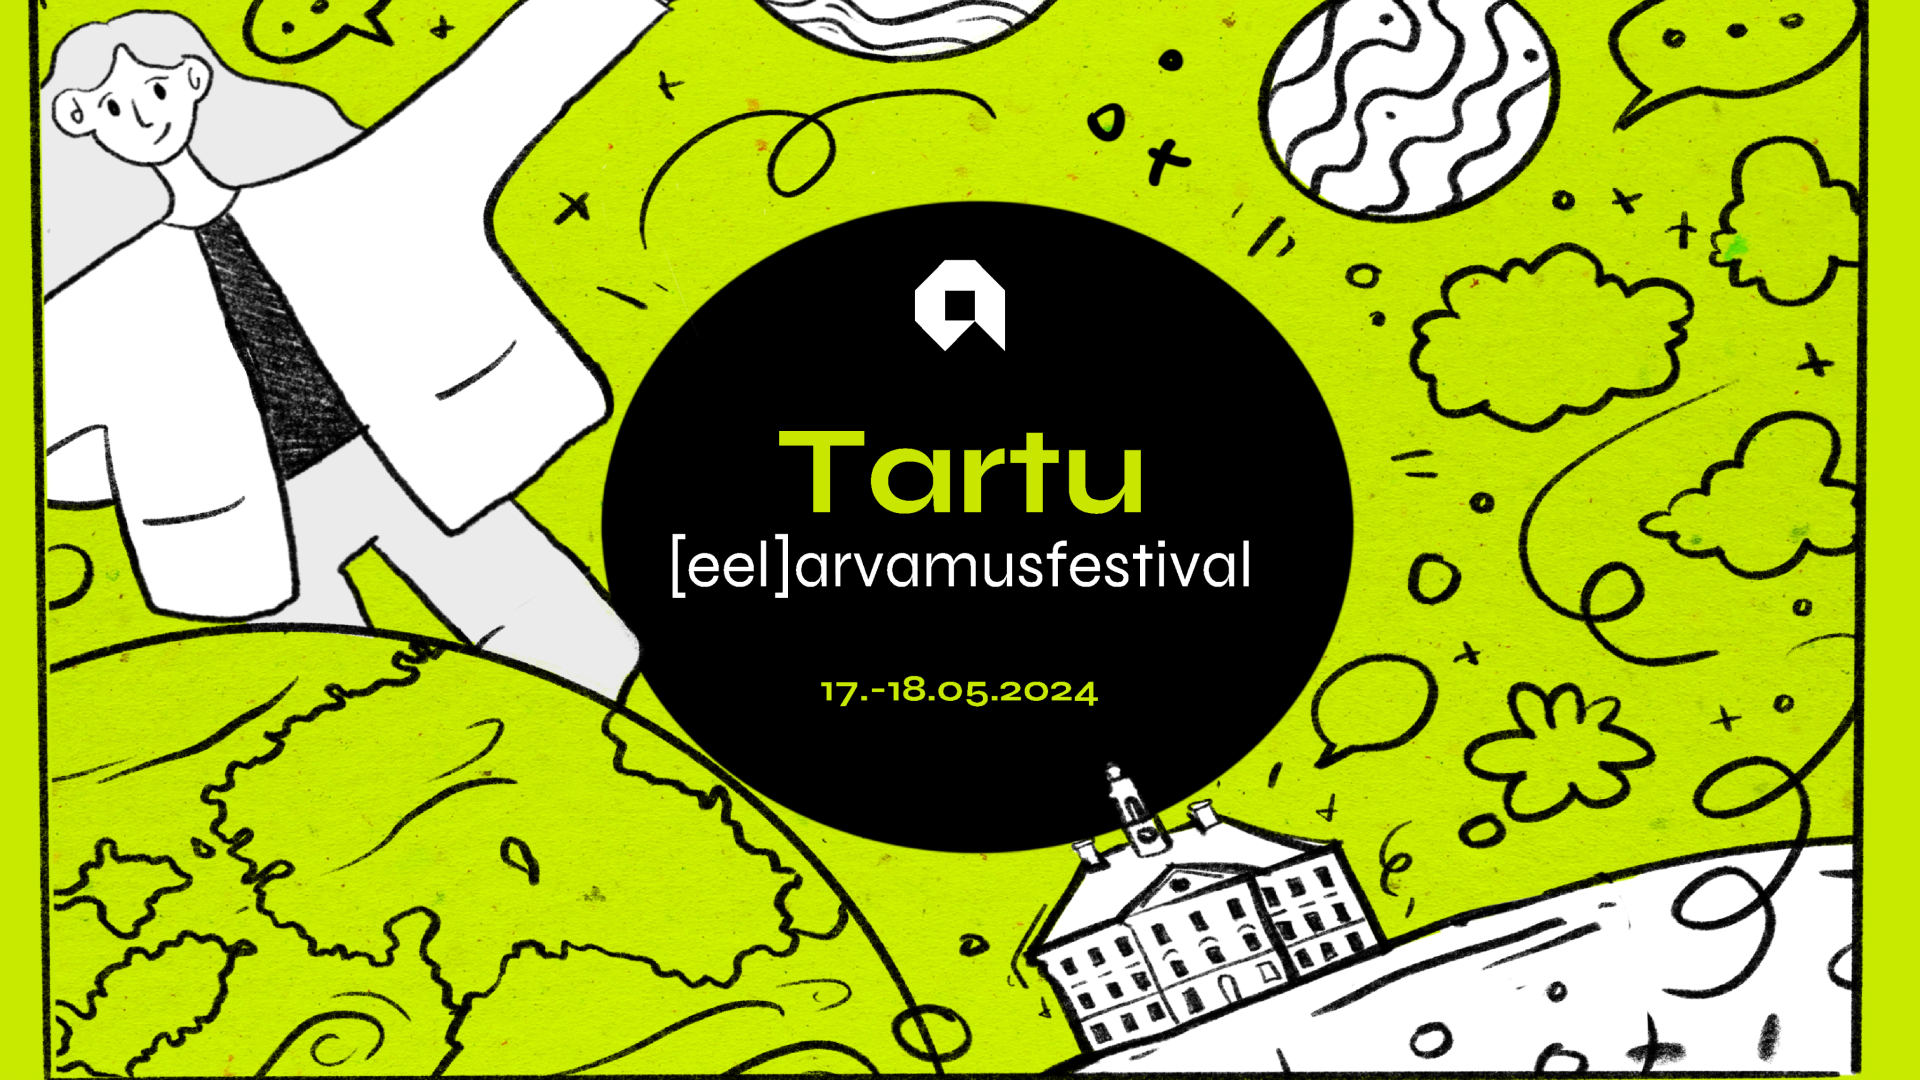 Tartu [pre]opinion festival is looking for discussion ideas